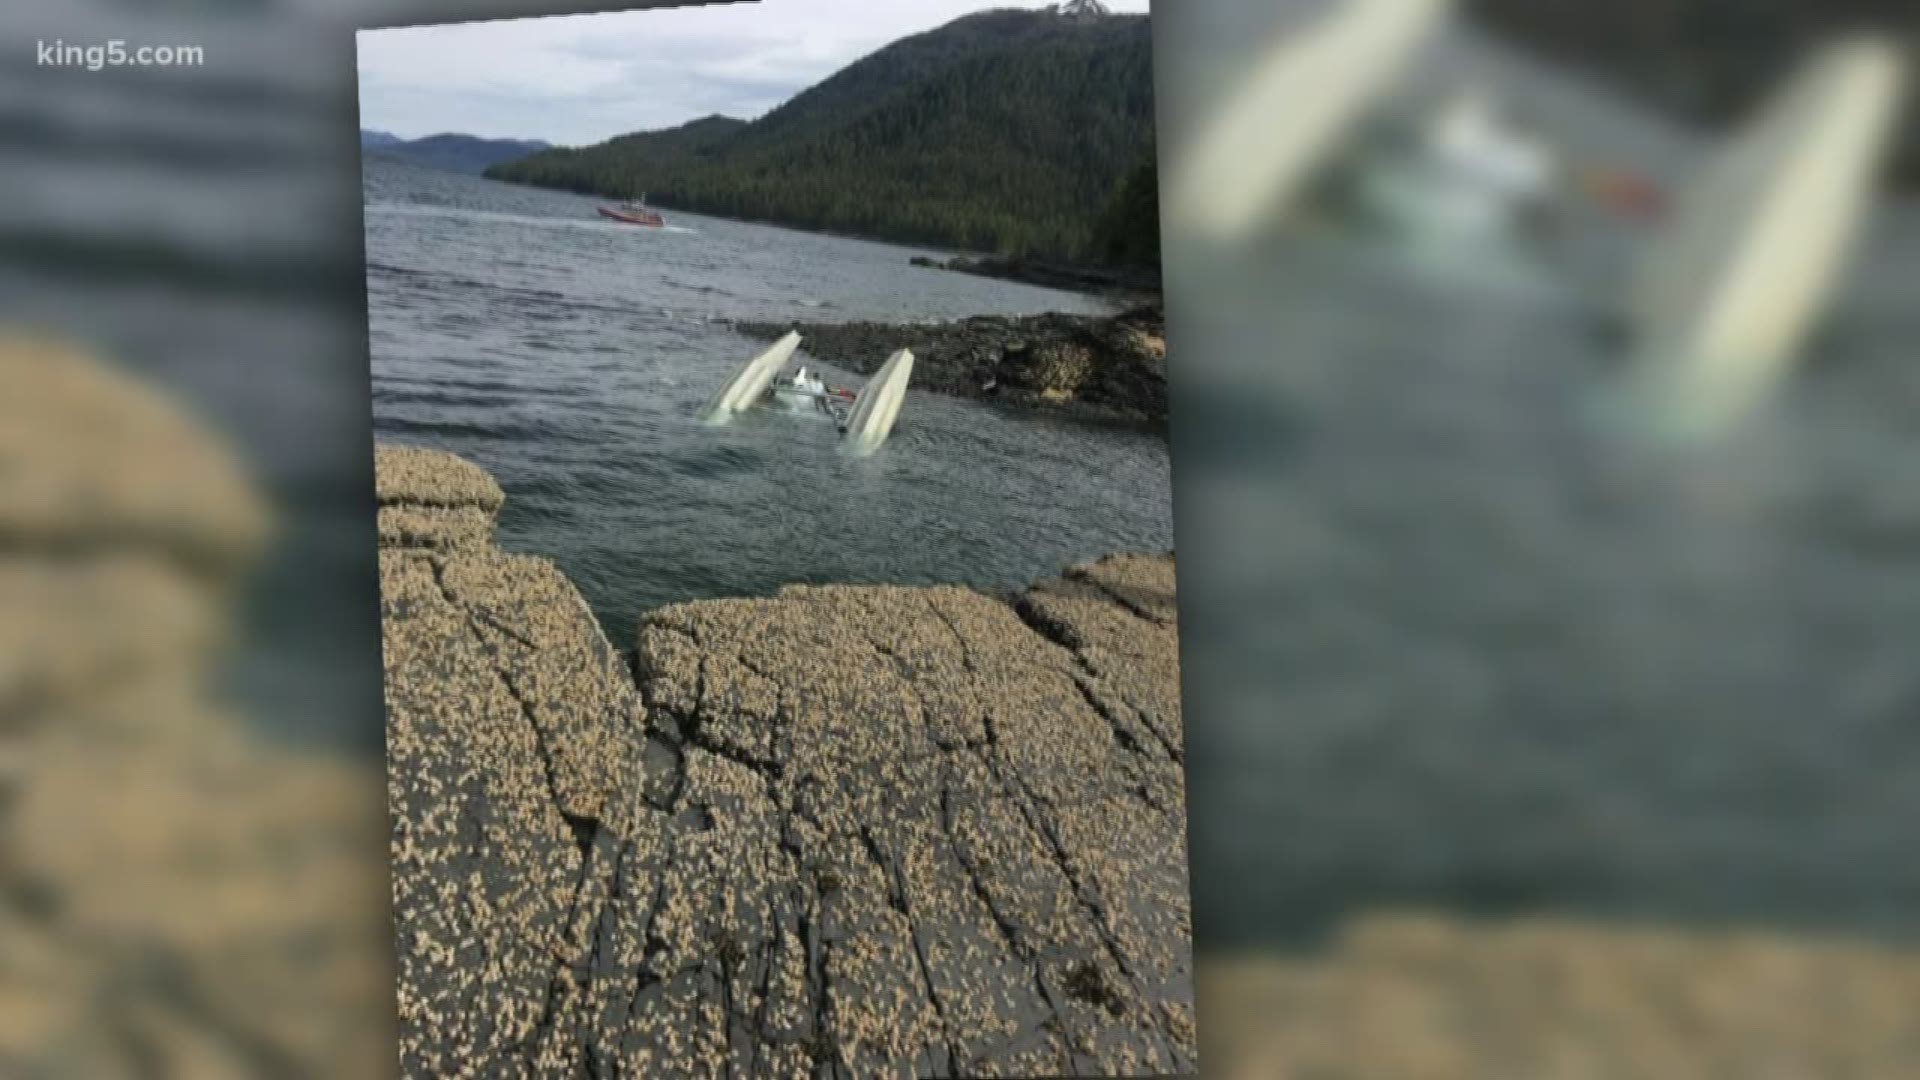 Of the 16 people involved in the Alaska float plane collision, five people died in the mid-air crash; 10 other passengers survived. One person remains missing, according to Taquan Air. KING 5's Glenn Farley reports.